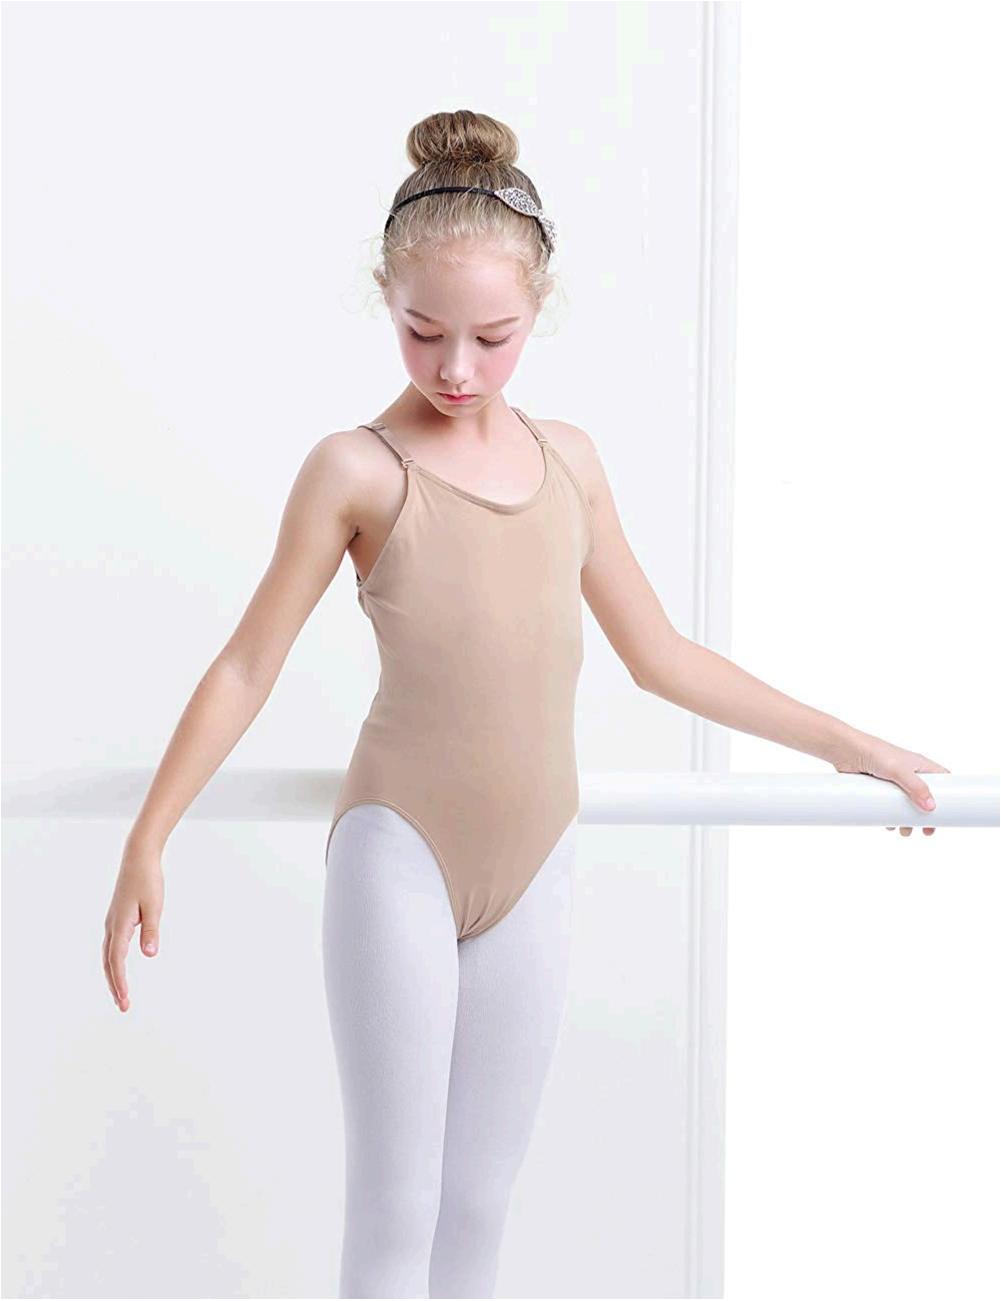 WHITE Camisole Leotard for Ballet and Gymnastics - The 